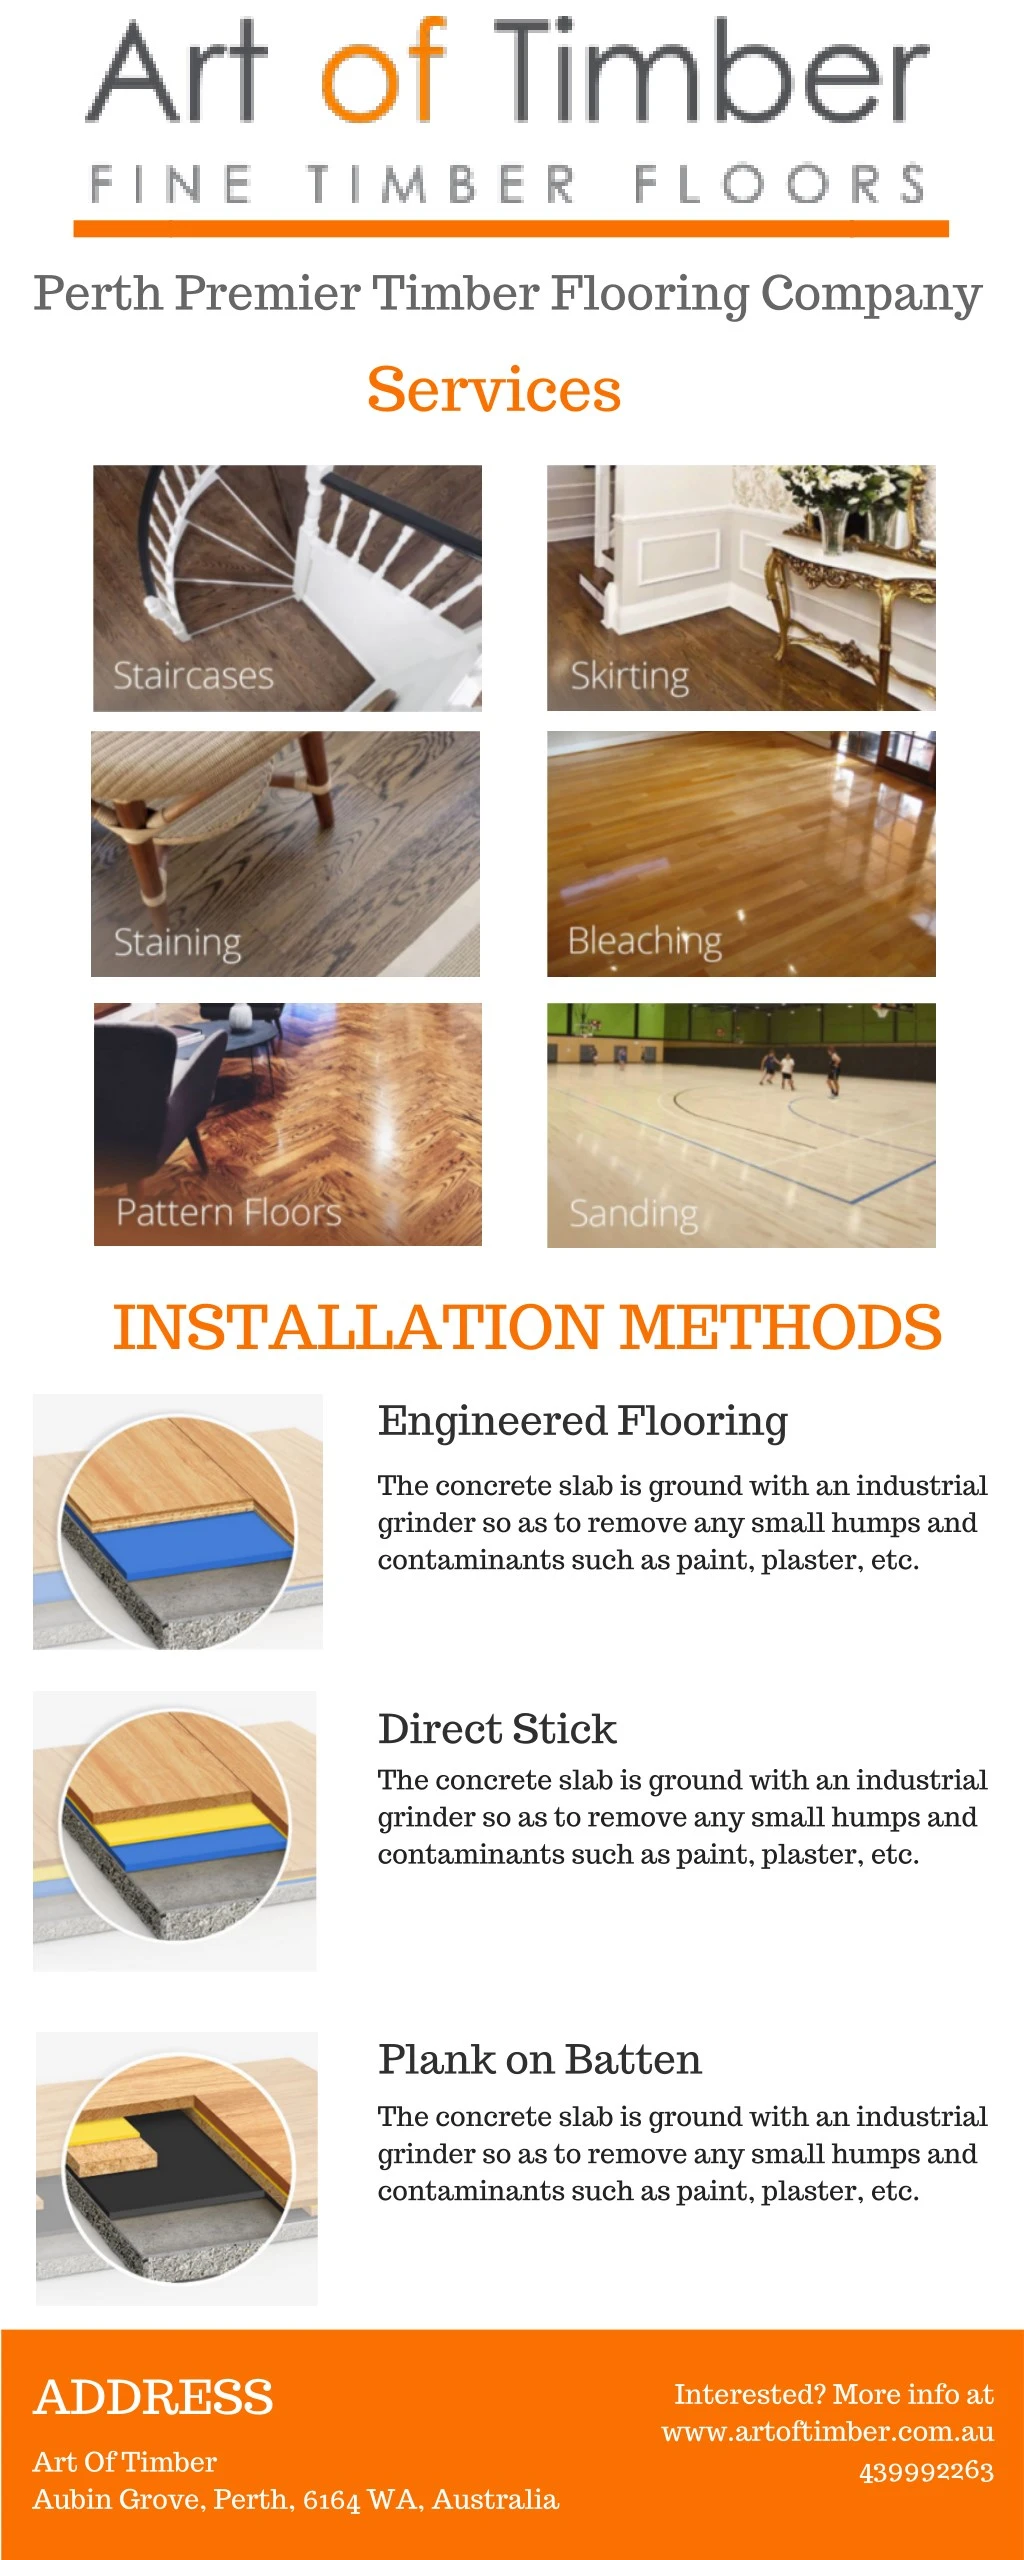 perth premier timber flooring company services